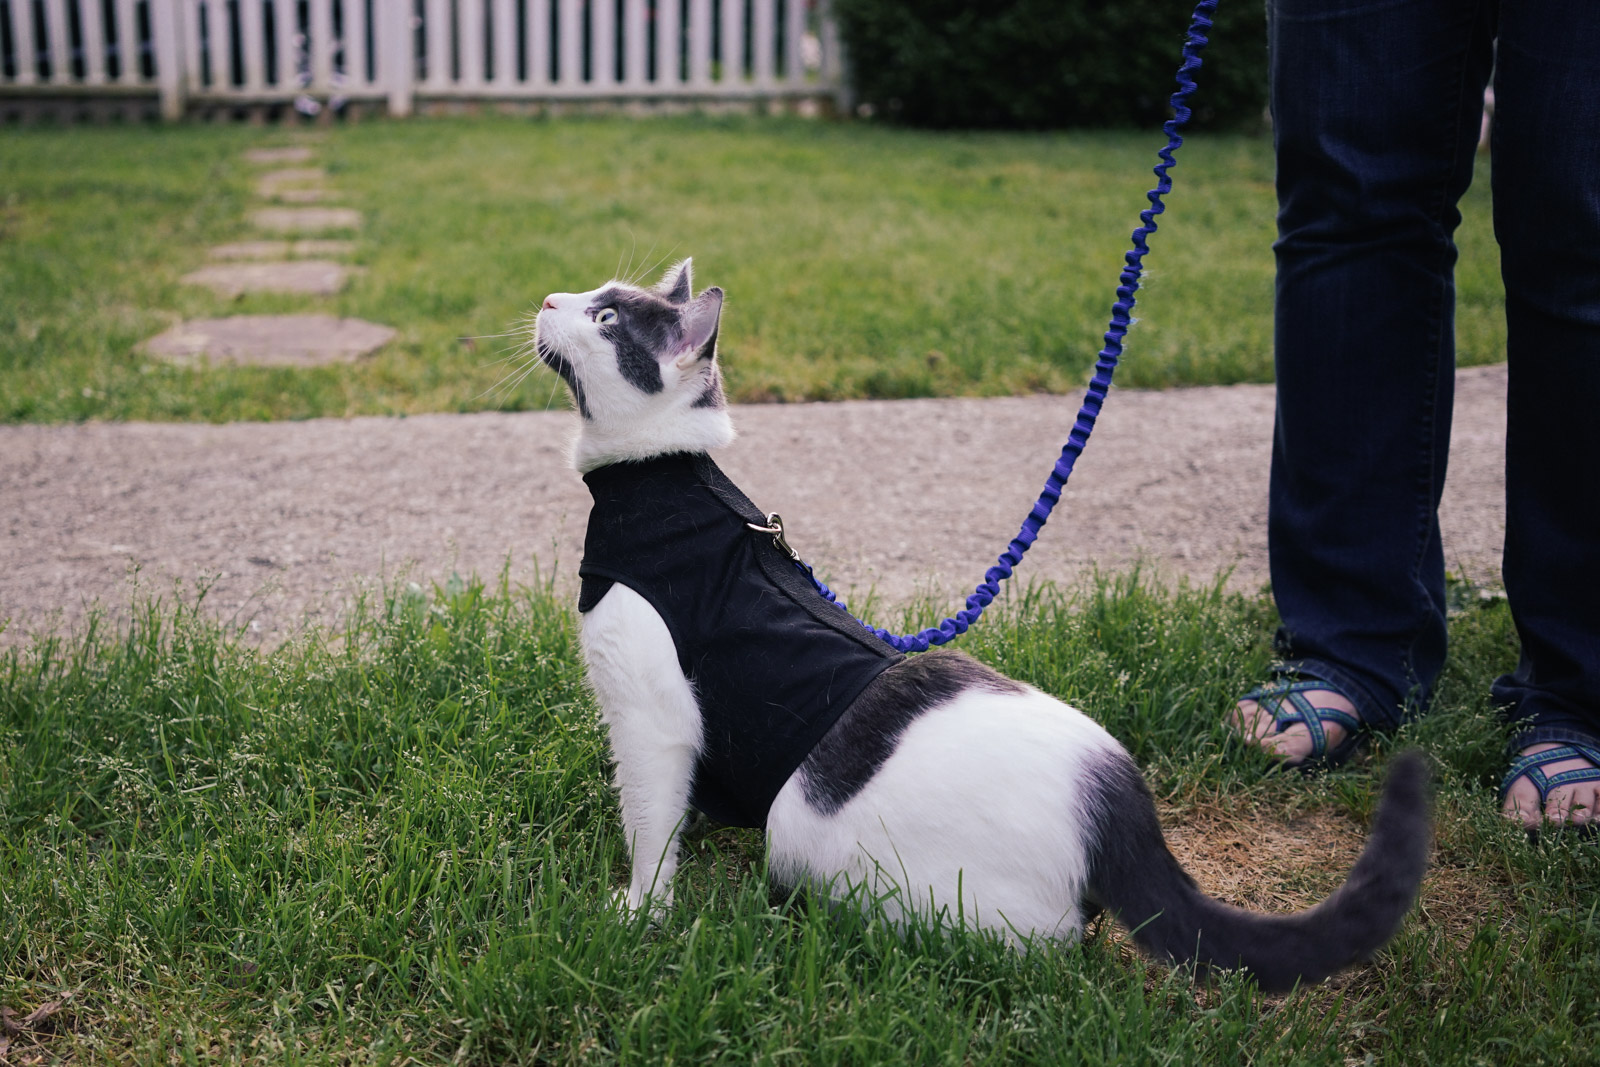 What kind of harness does your cat need? – Adventure Cats